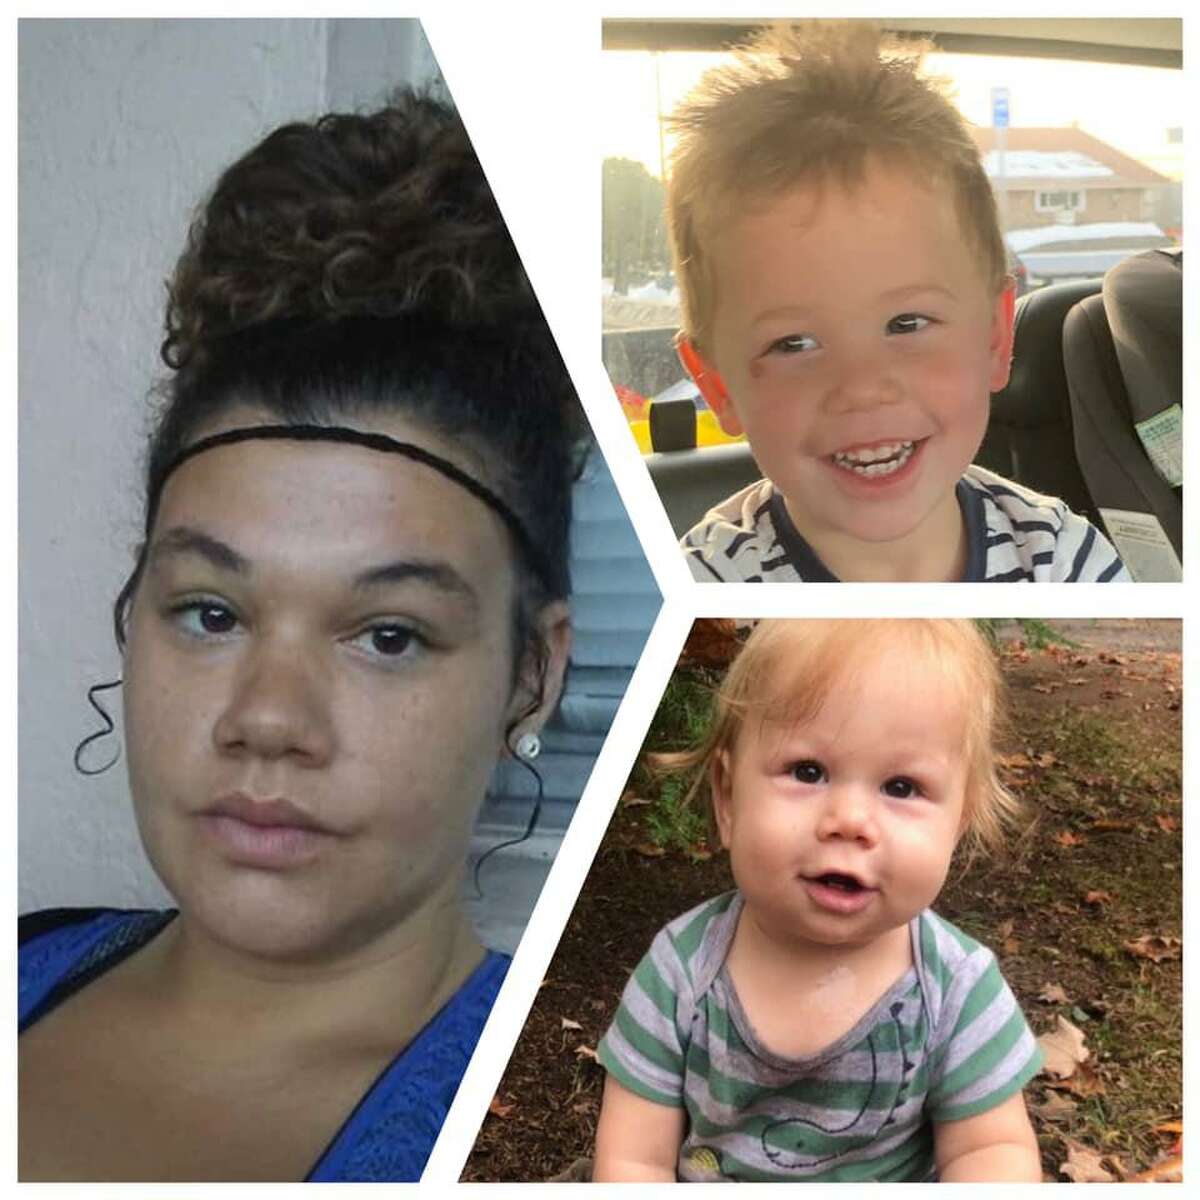 Lucifer Guy, 2, and Thor Guy, 0, were last seen in the company of their mother, Brittany Young, according to North Haven police.